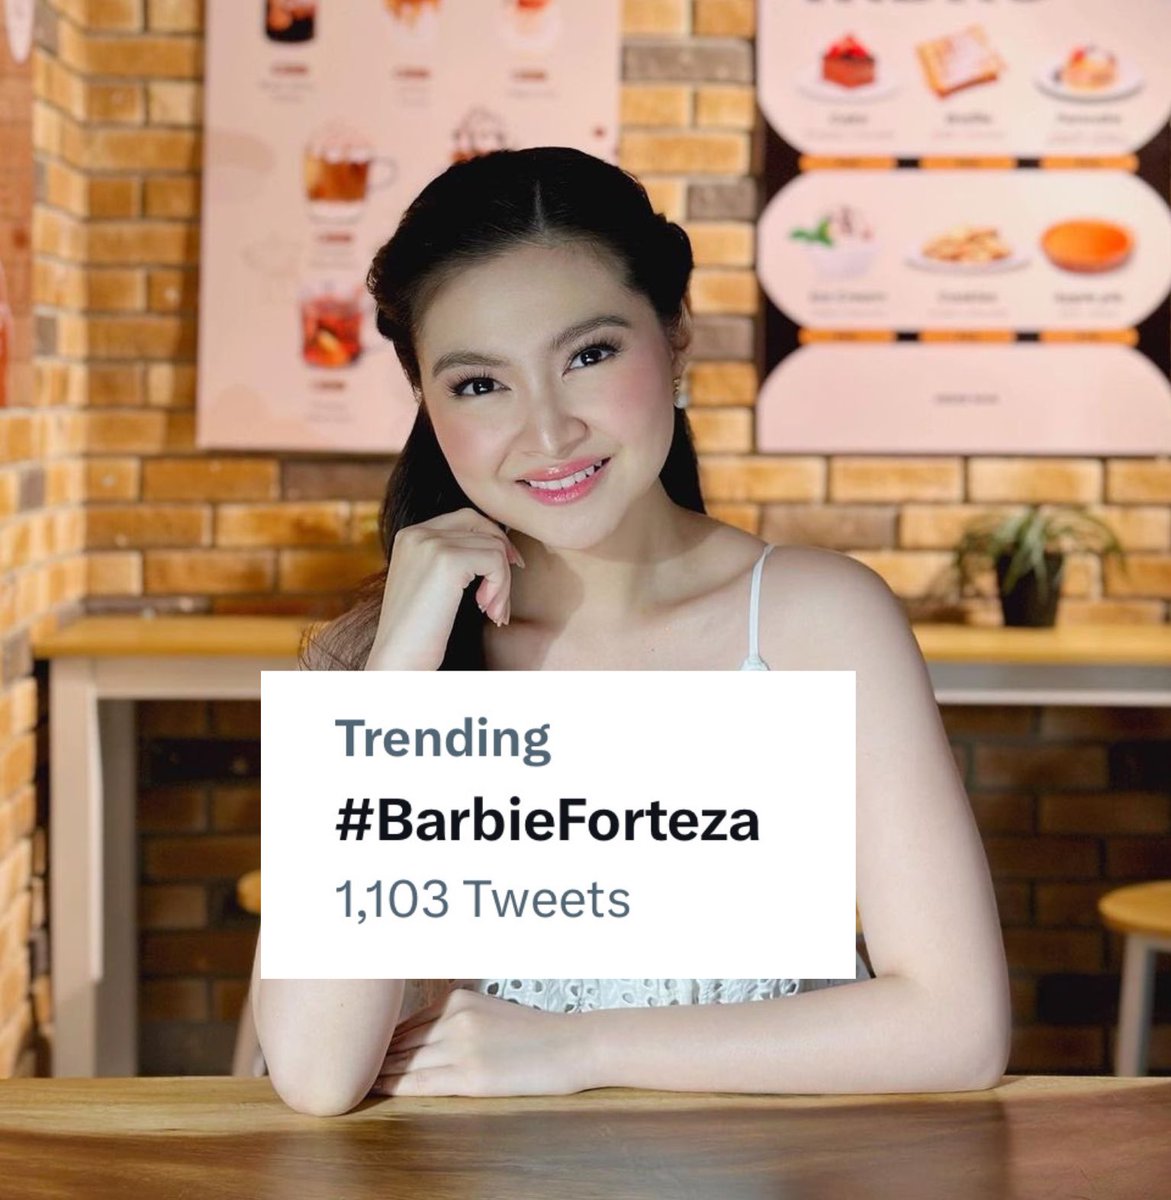 [ TRENDING 🔥]

Our Kapuso Primetime Princess, @dealwithBARBIE is trending after being announced as Luster Premium Oral Care’s First Ever Brand Ambassador ✨

Let’s congratulate Barbie by using #BarbieForteza in your tweets!

#BarDa #FiLay
Barbie Forteza